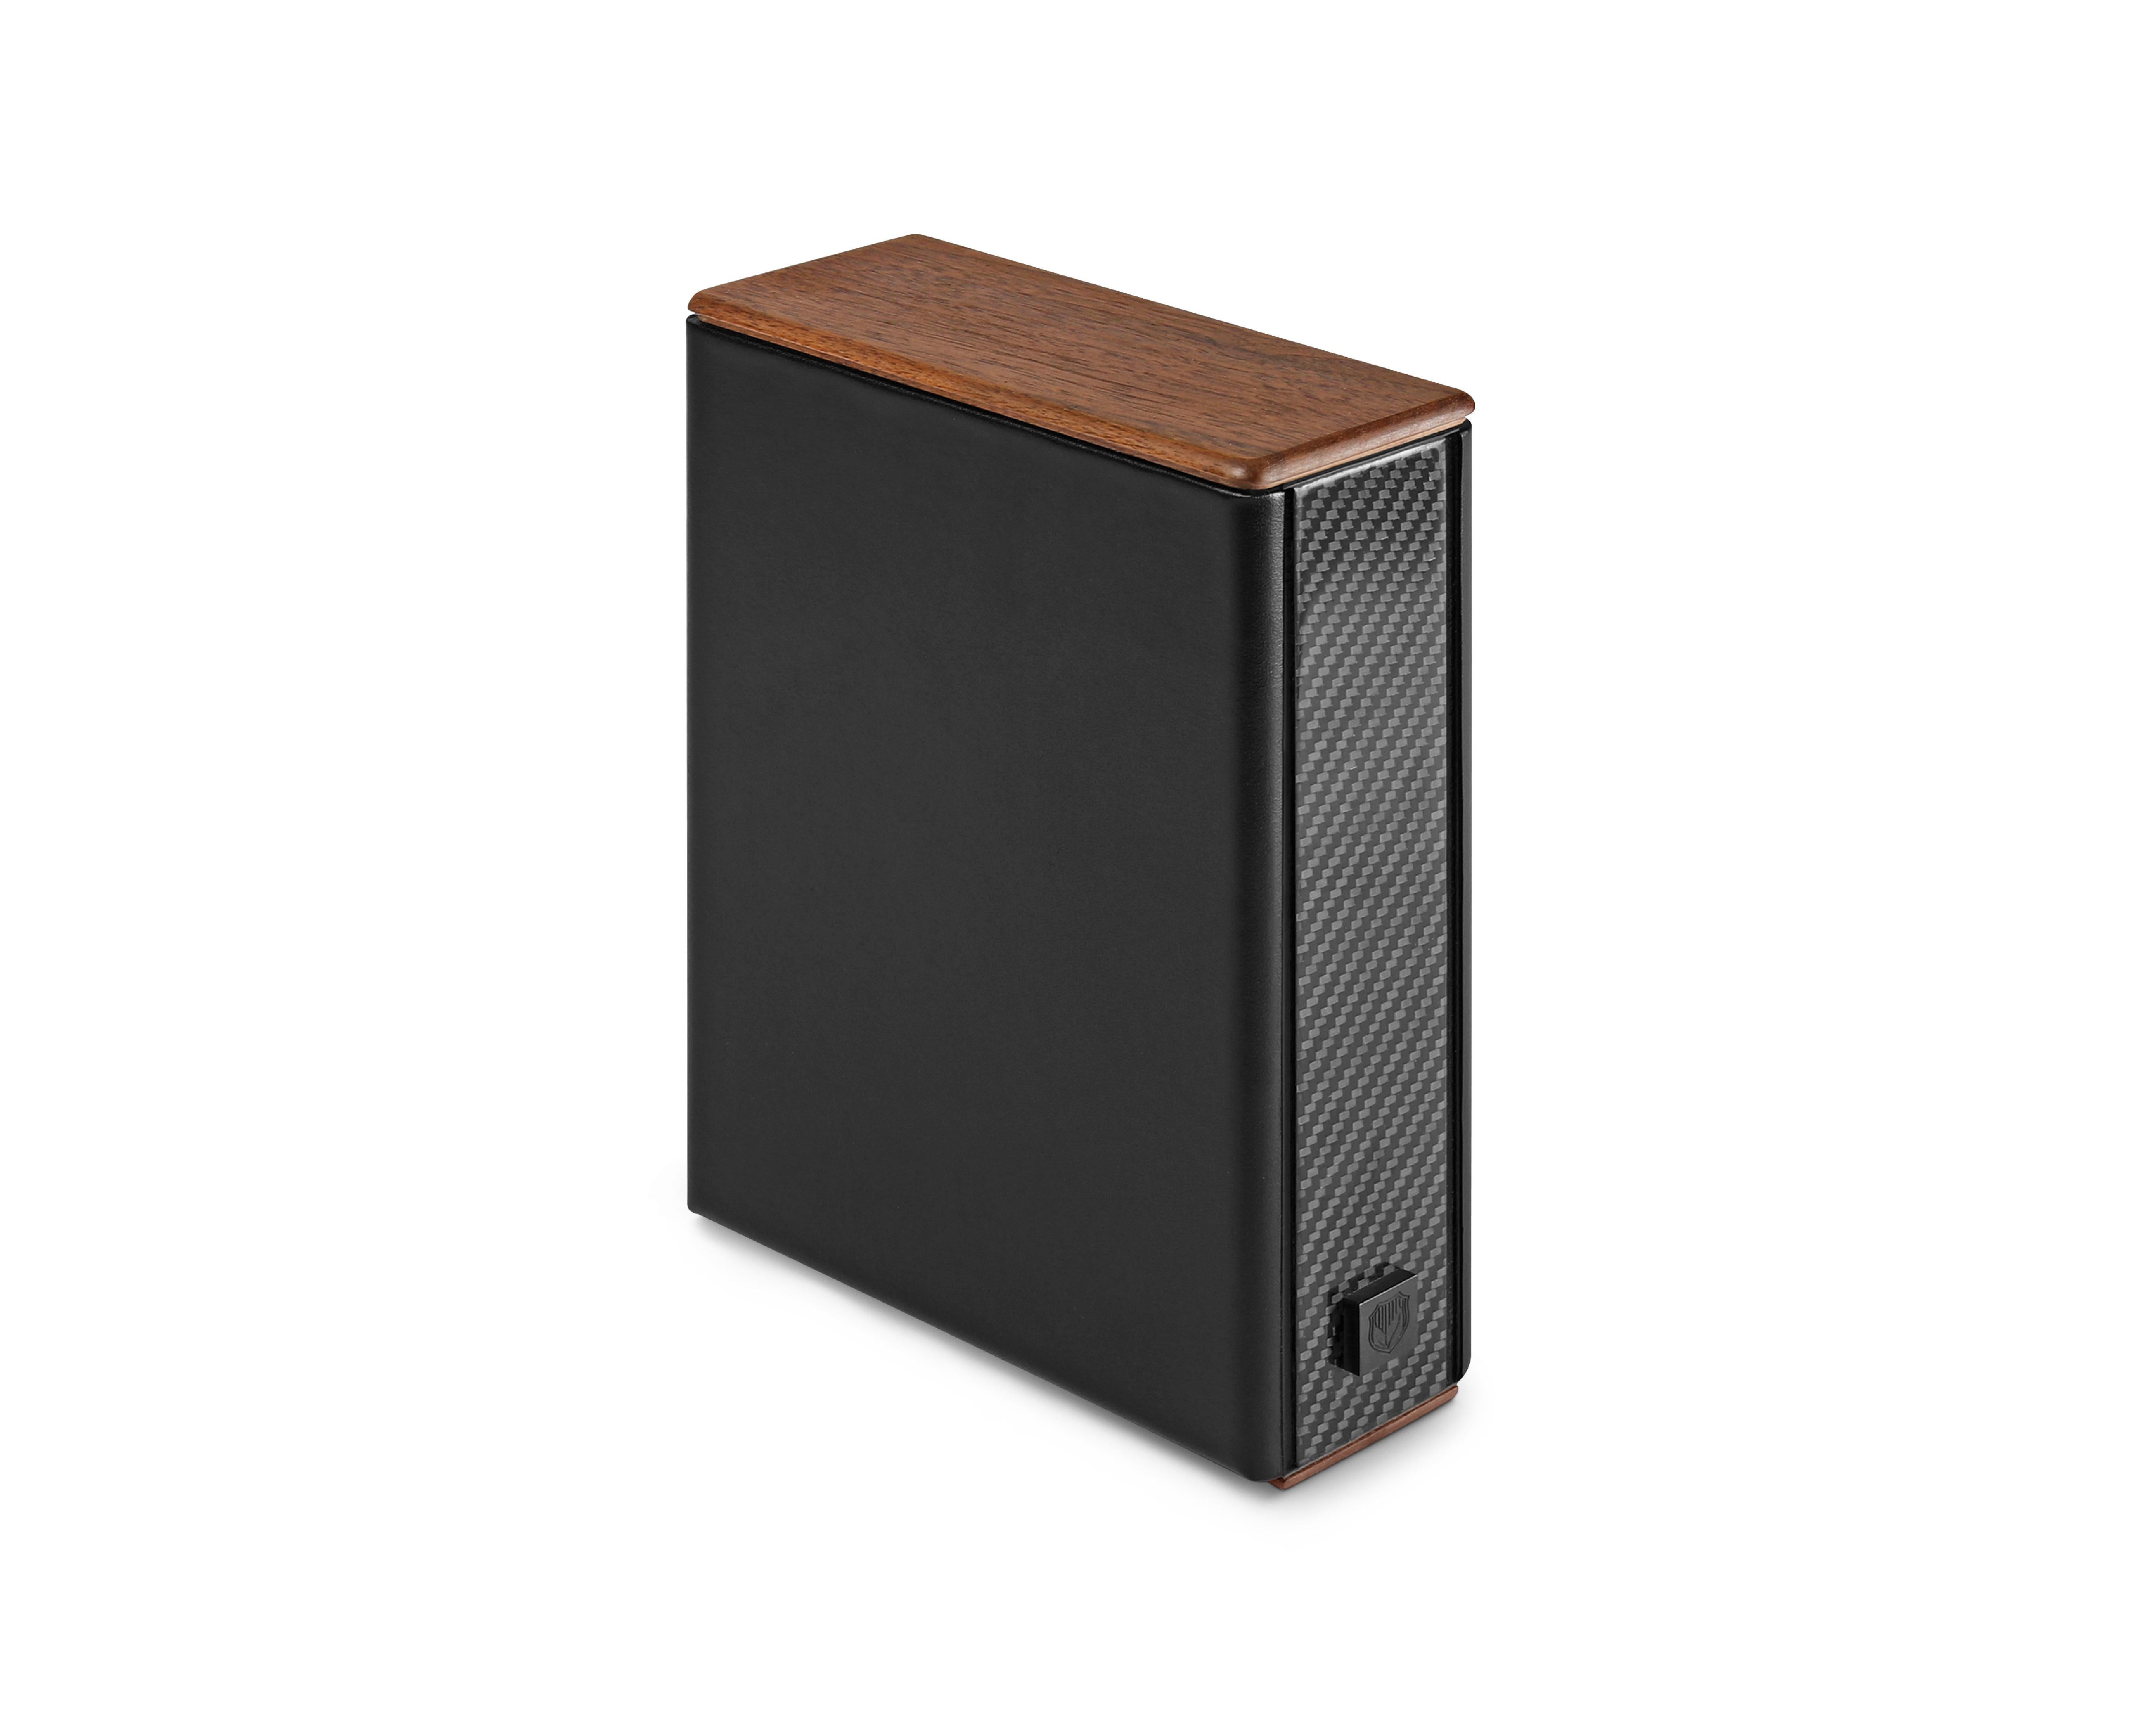 Talon bookend with leather body by Madheke
Dimensions: W 6.2 D 15.2 H 21 cm
Materials: Leather, Carbon Fibre, Wood

The TALON bookend offers both functionality and style and is a modern take on the bookshelf staple. The black leather body and